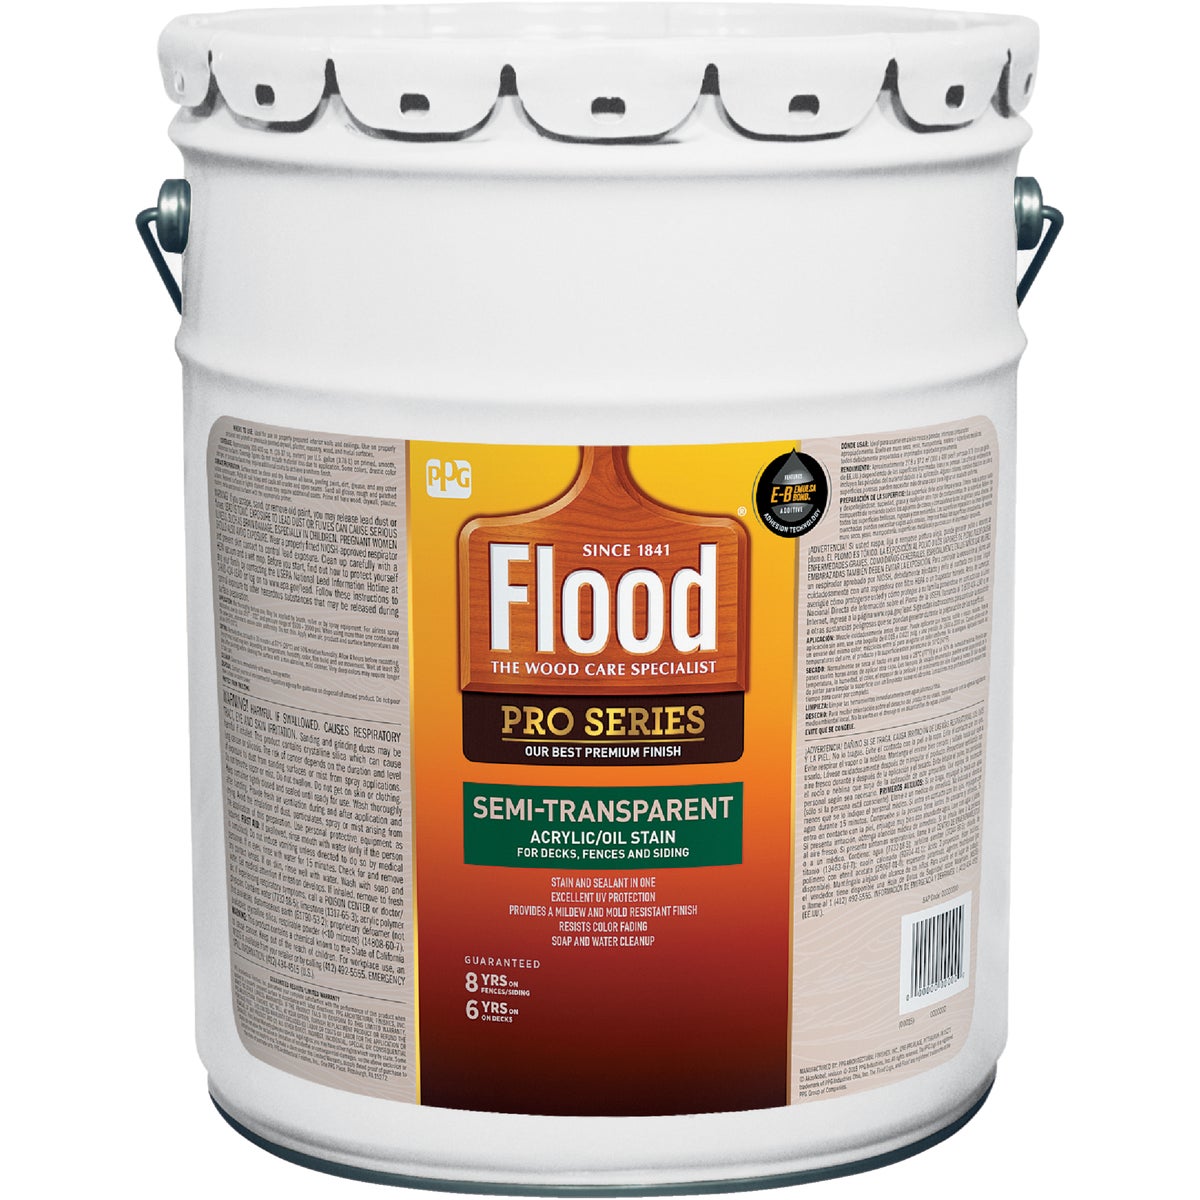 Flood Semi-Transparent Alkyd/Oil Wood Stain & Finish In One, Neutral, 5 Gal.